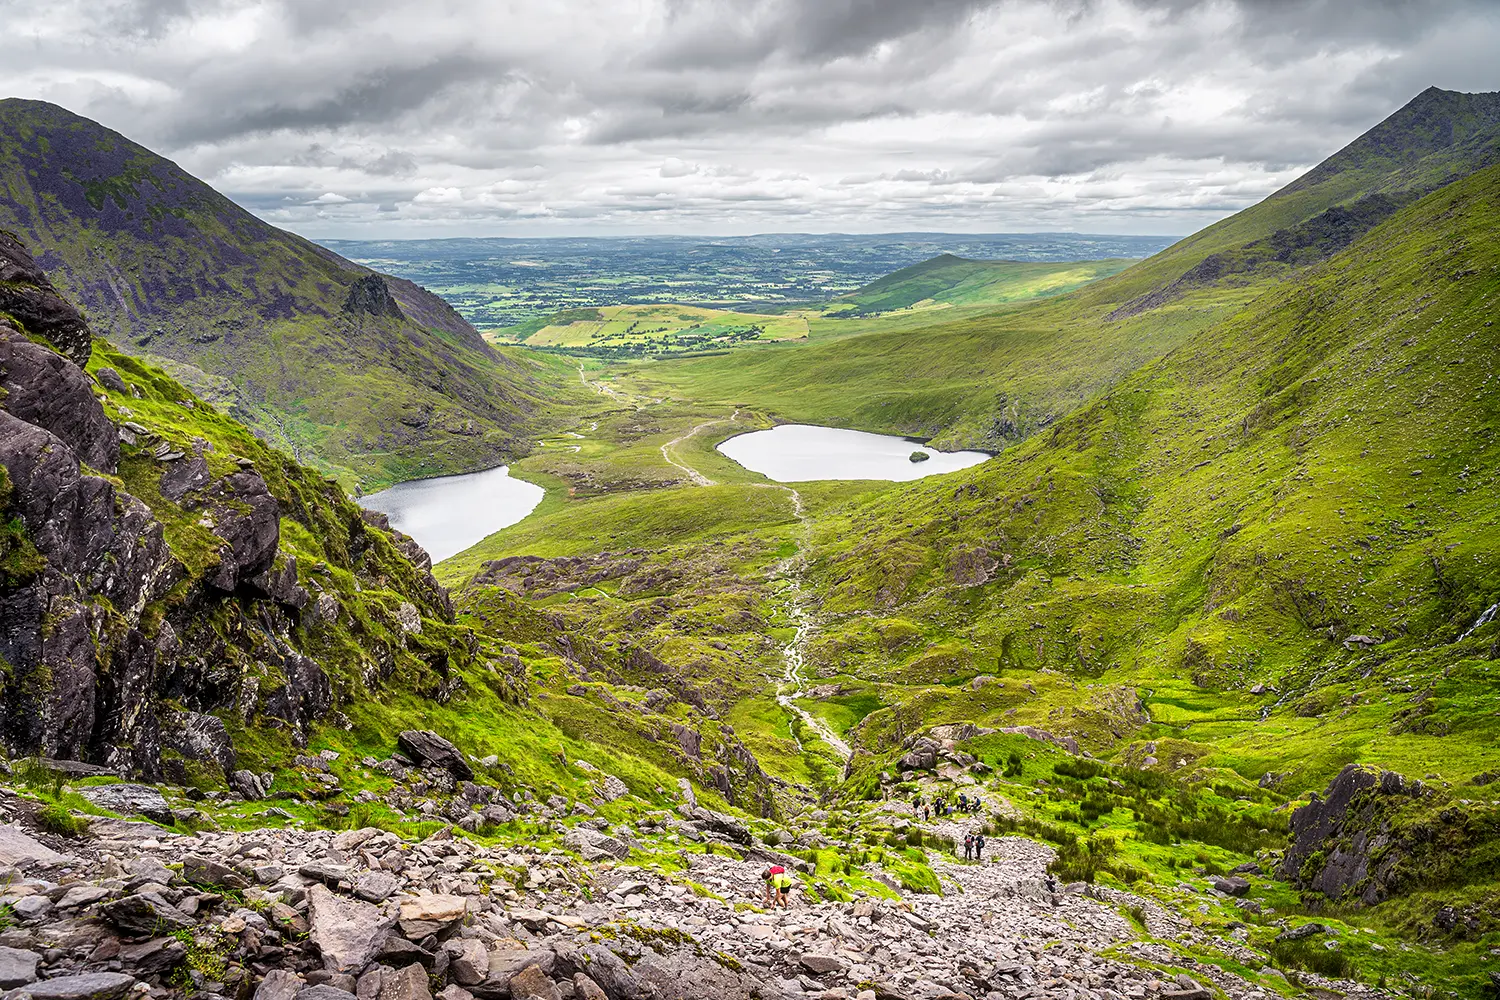 Group of hikers climbing Devils Ladder, one of most difficult trails, to reach highest Irish mountain Carrauntoohil in Ring of Kerry, Ireland